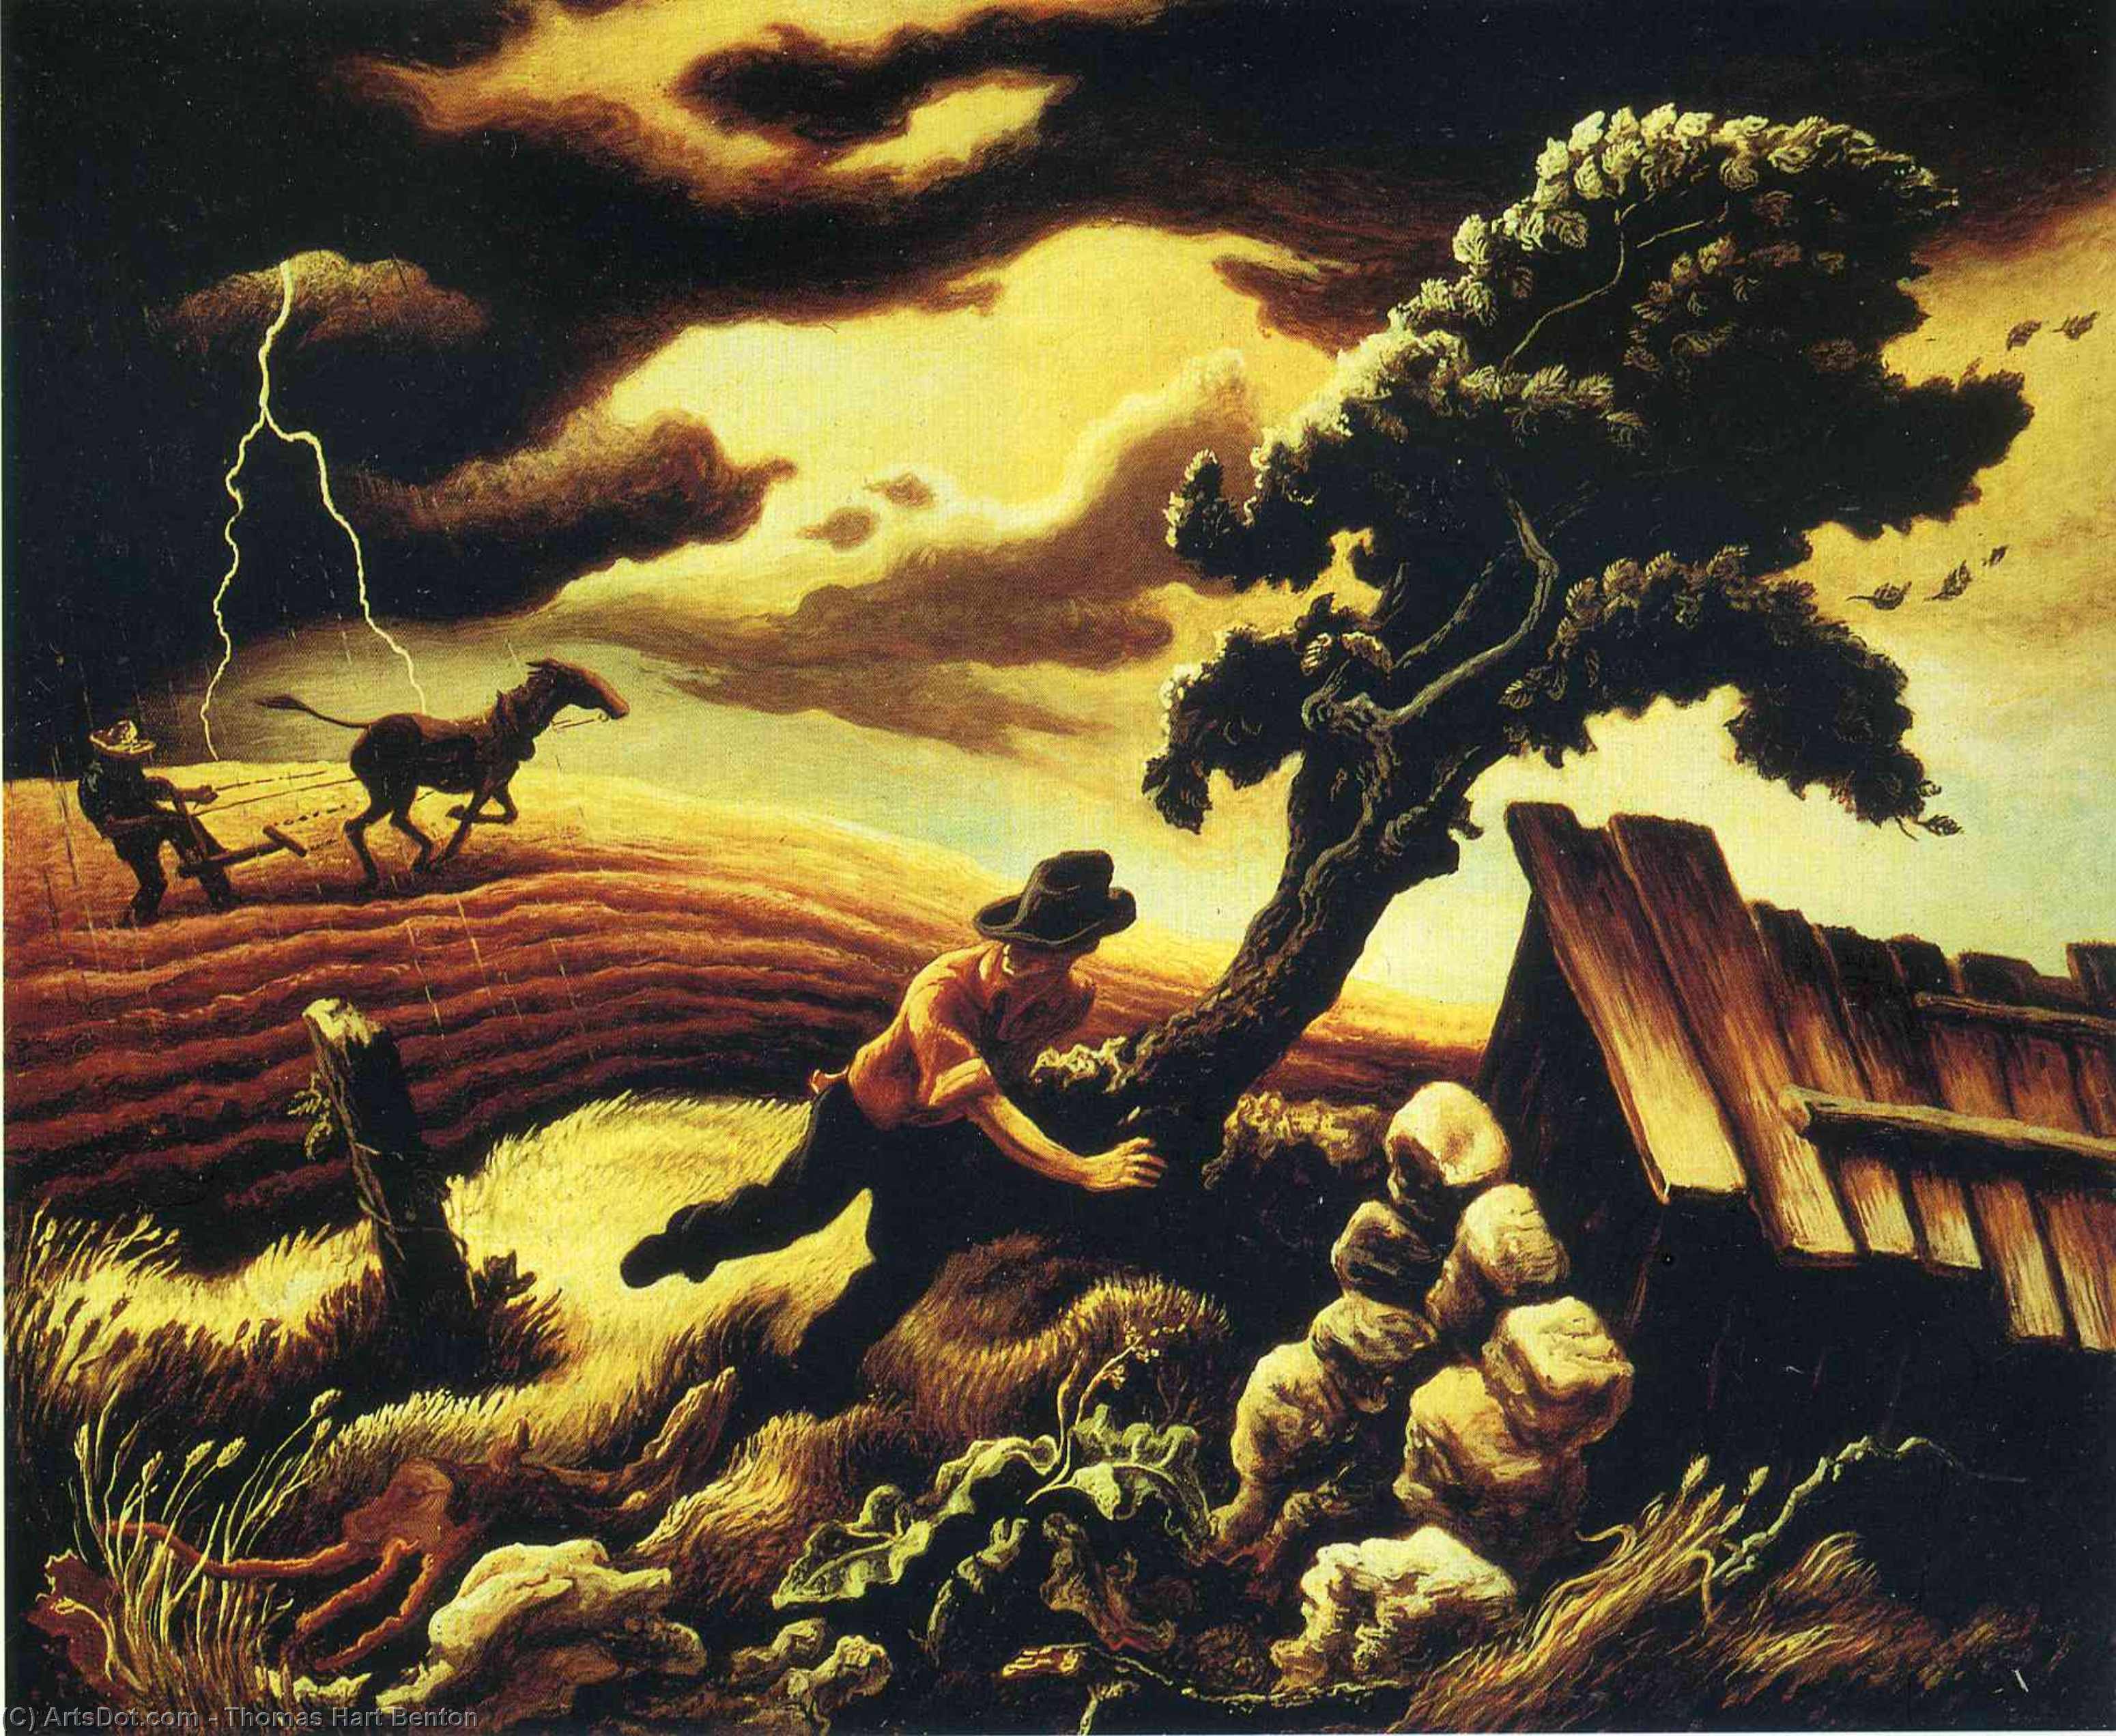 Order Paintings Reproductions The Hail Storm, 1940 by Thomas Hart Benton (Inspired By) (1889-1975, United States) | ArtsDot.com